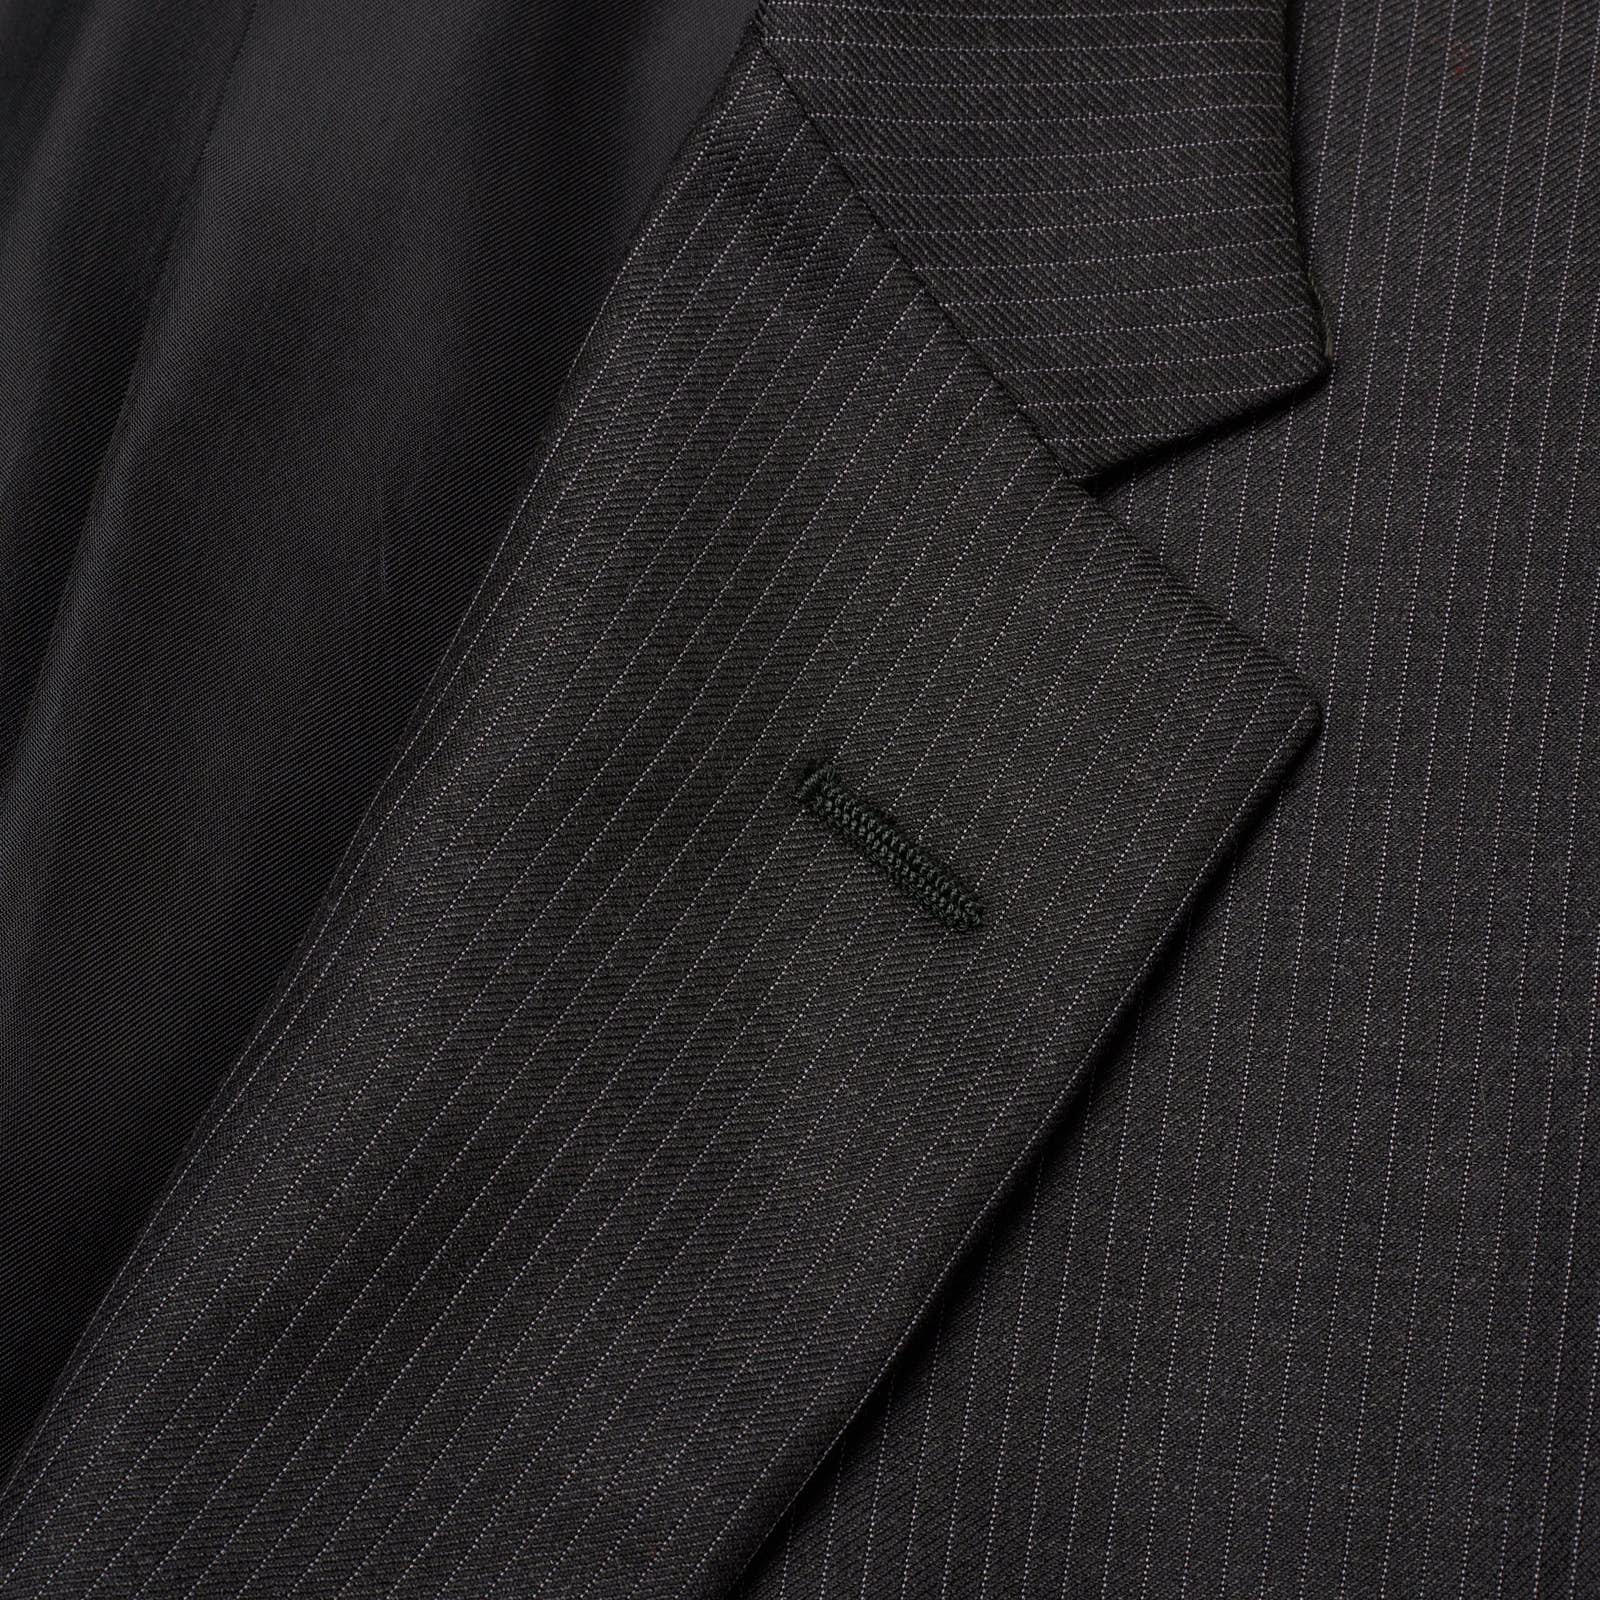 VANNUCCI Milano Handmade Charcoal Gray Striped Virgin Wool Super 150's Suit NEW